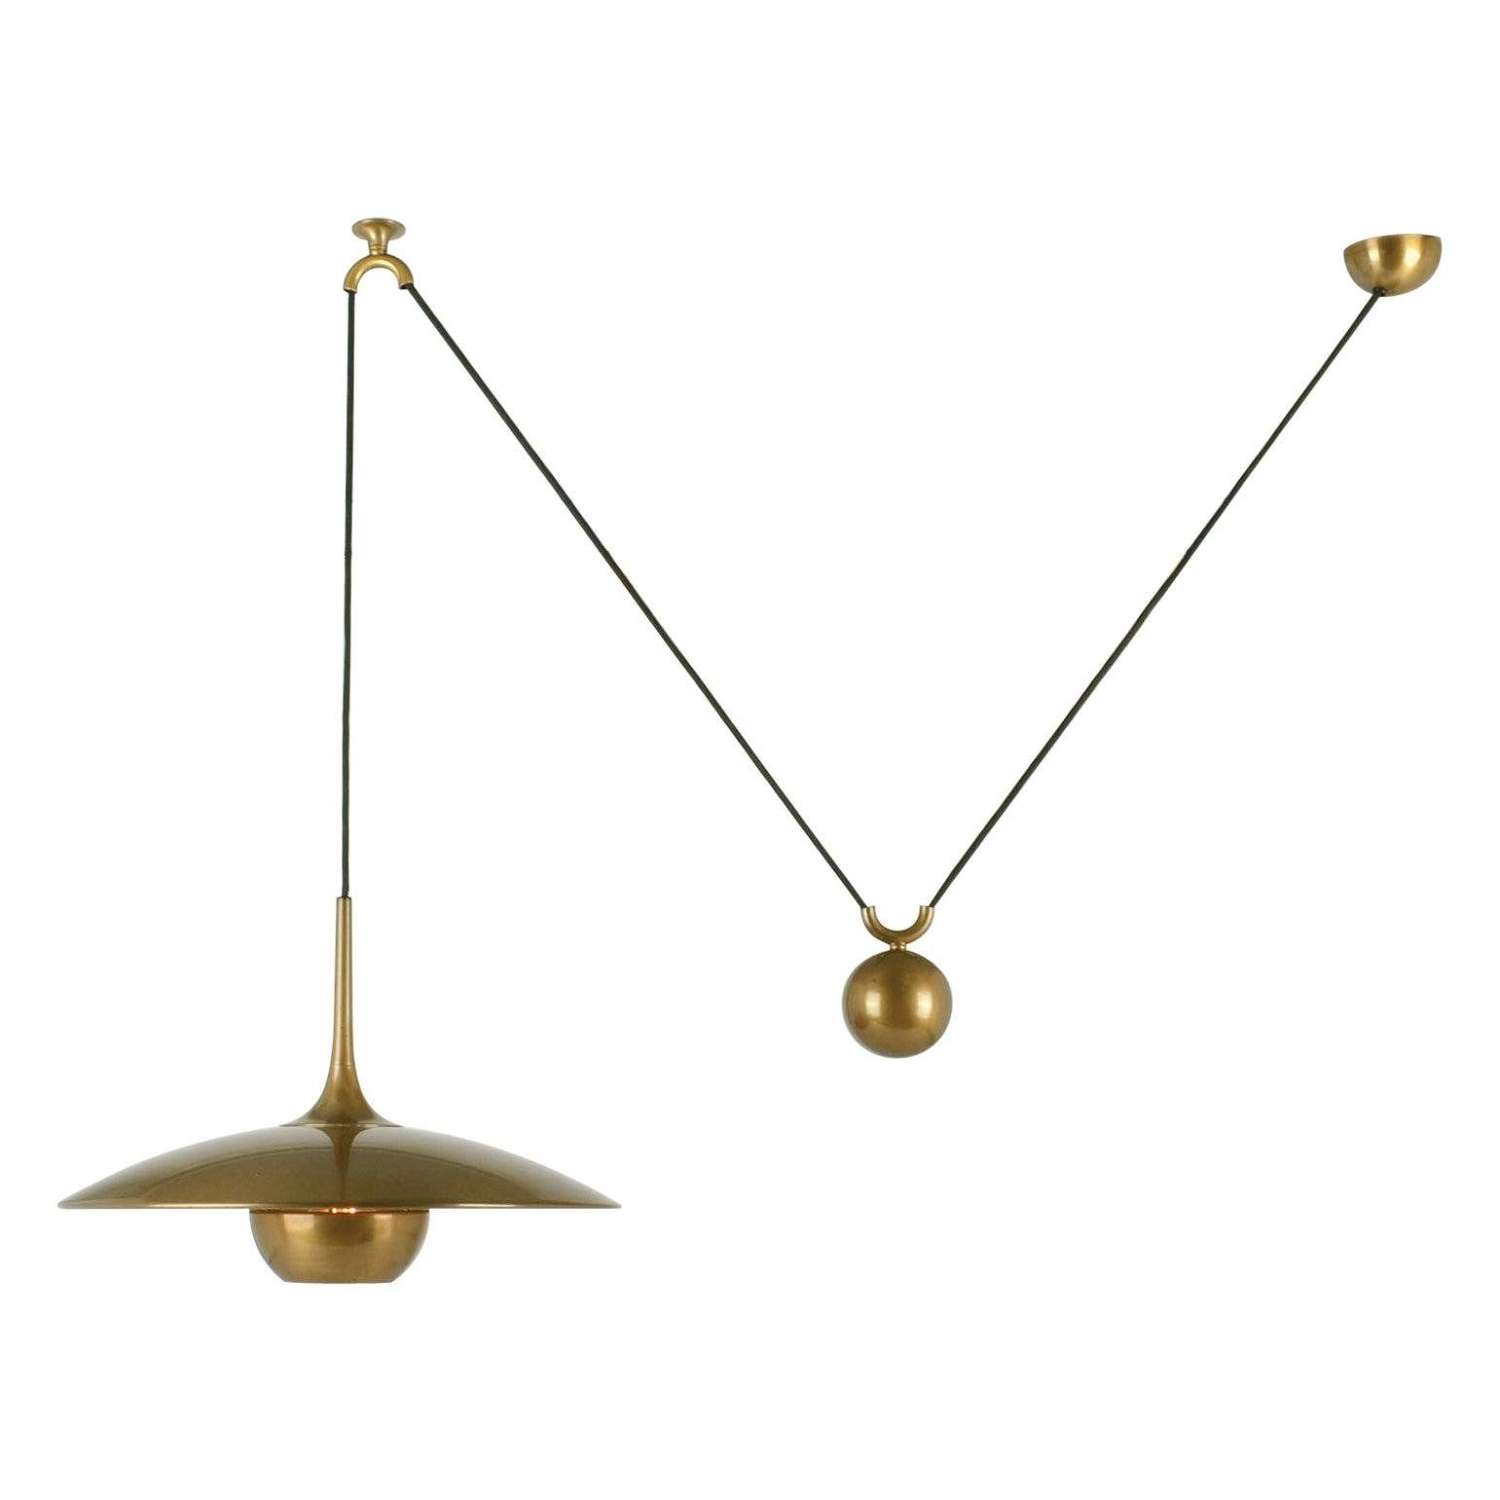 Pendant Lamp Onos 40 in Brass by Florian Schulz 1960's, Counterbalance